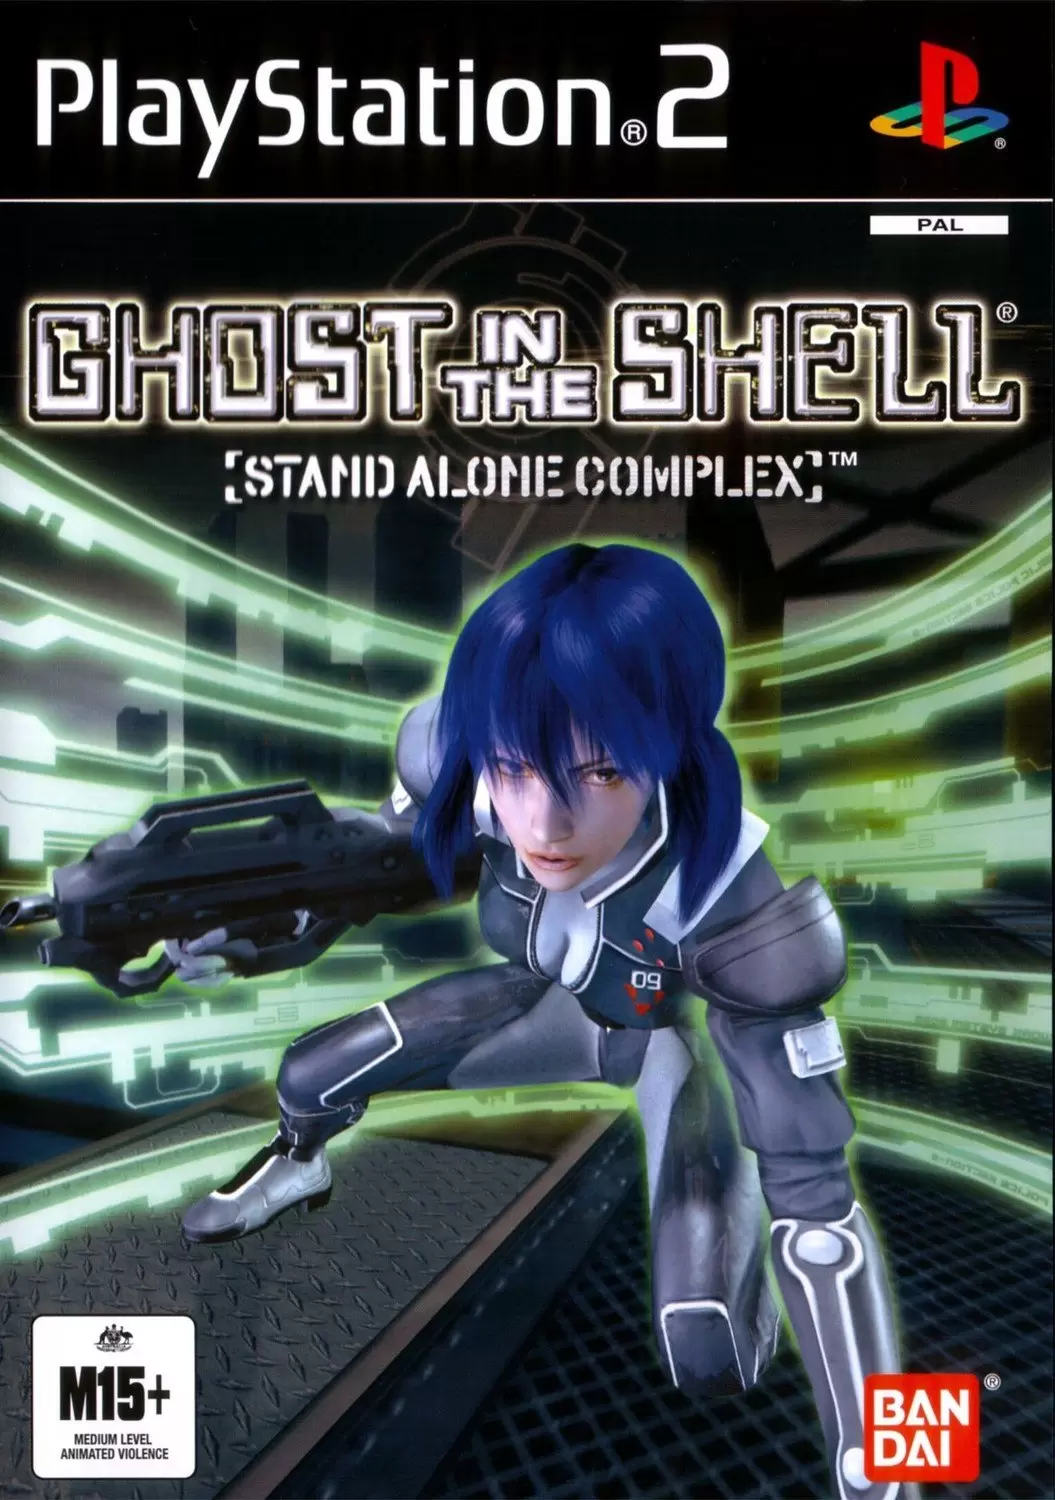 PS2 Games - Ghost in the Shell: Stand Alone Complex